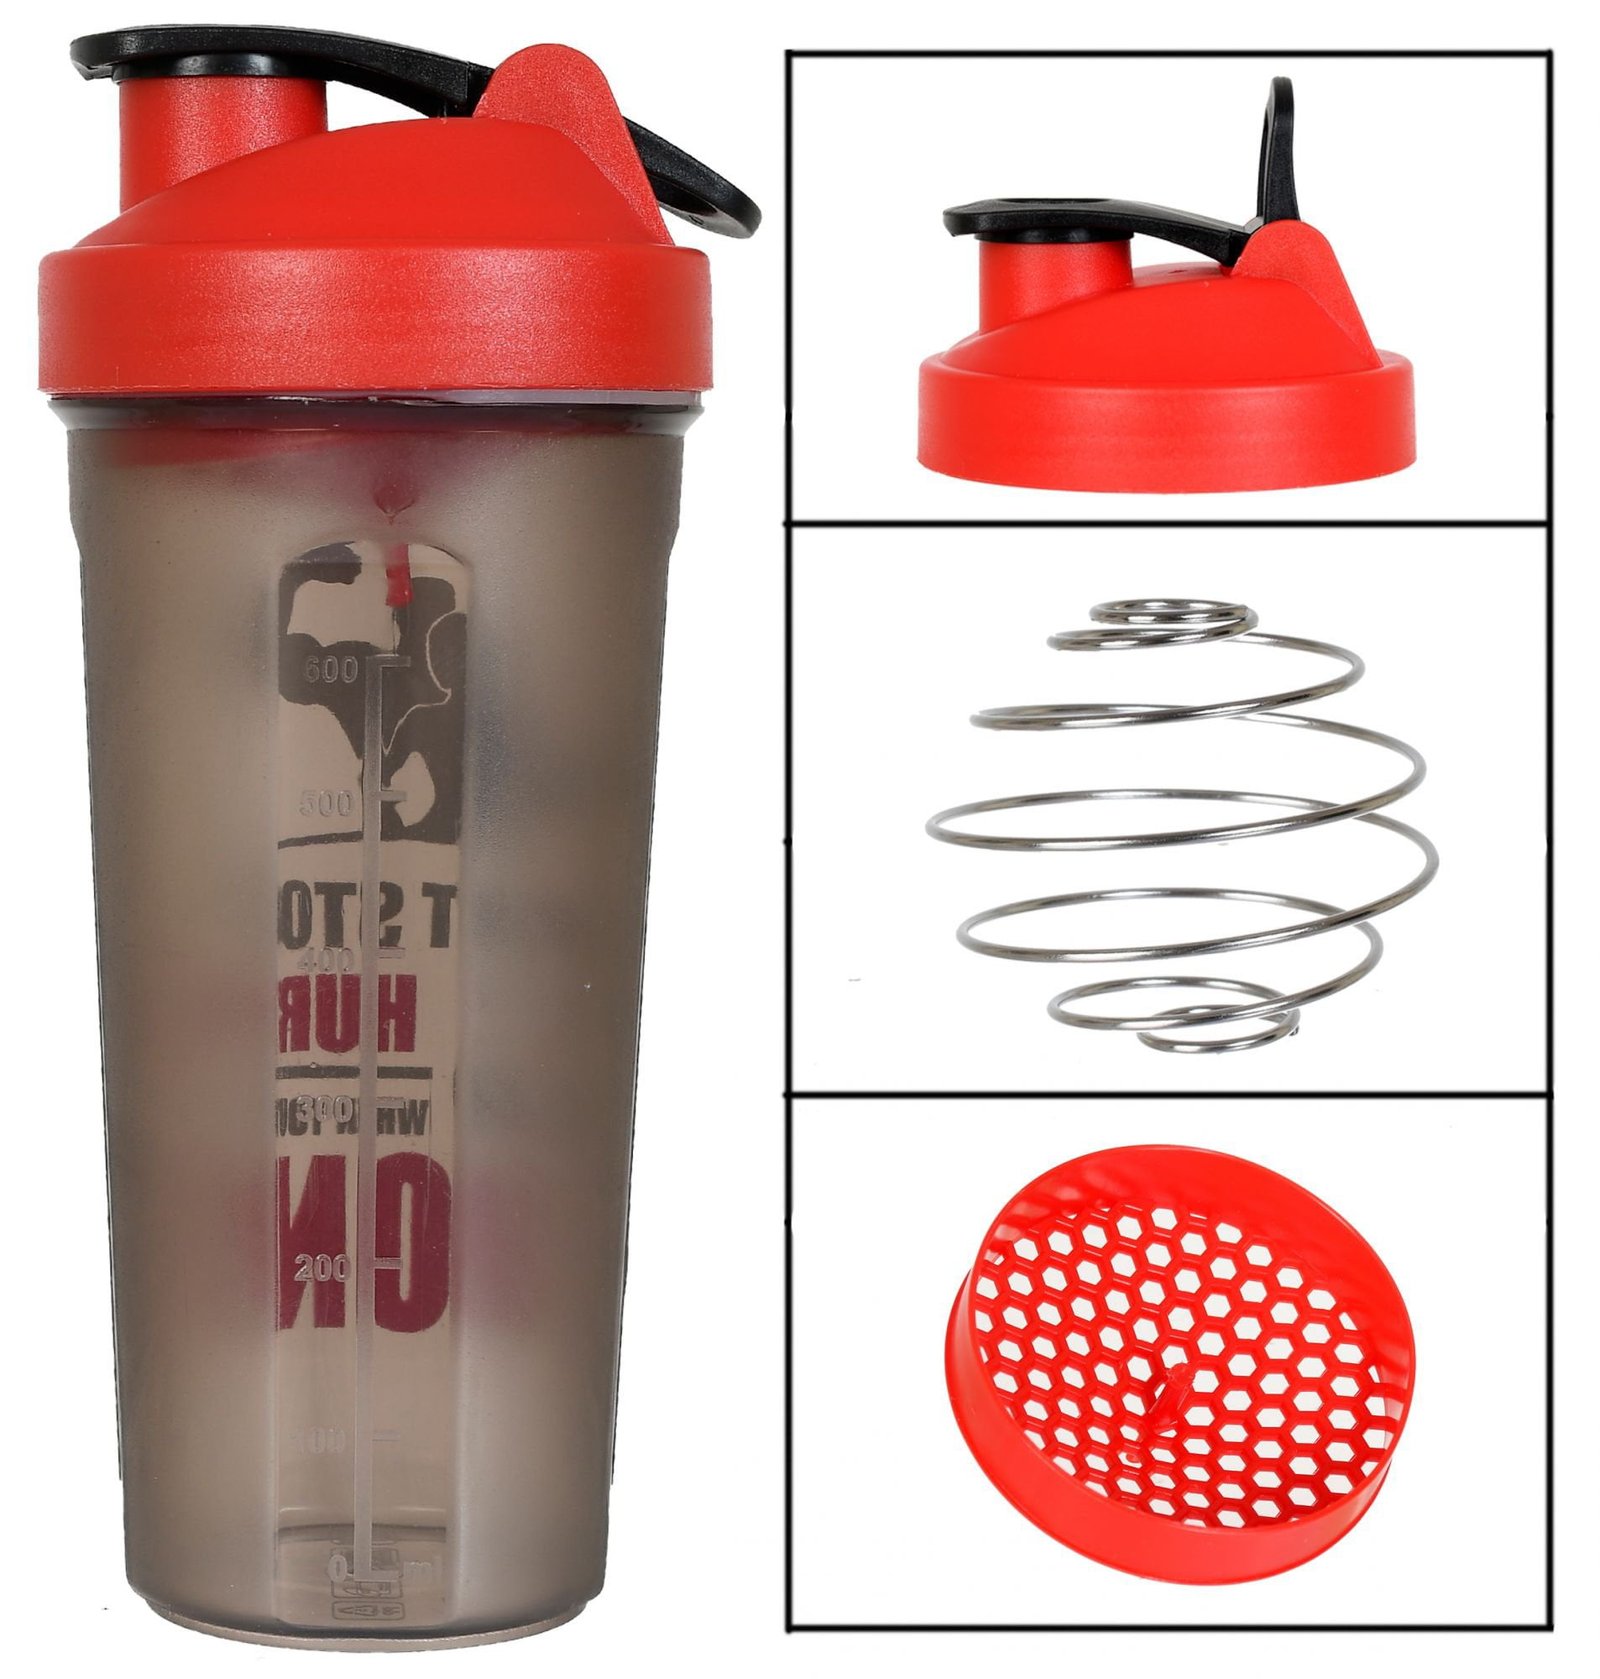 SAND DUNE Set of 1, 900 ml Each Red Unbreakable Shaker/Sipper Pet Bottle,  100% Leakproof, BPA-Free Blender Bottle, Ideal for Water, Whey Protein,  Preworkout, Shakes 